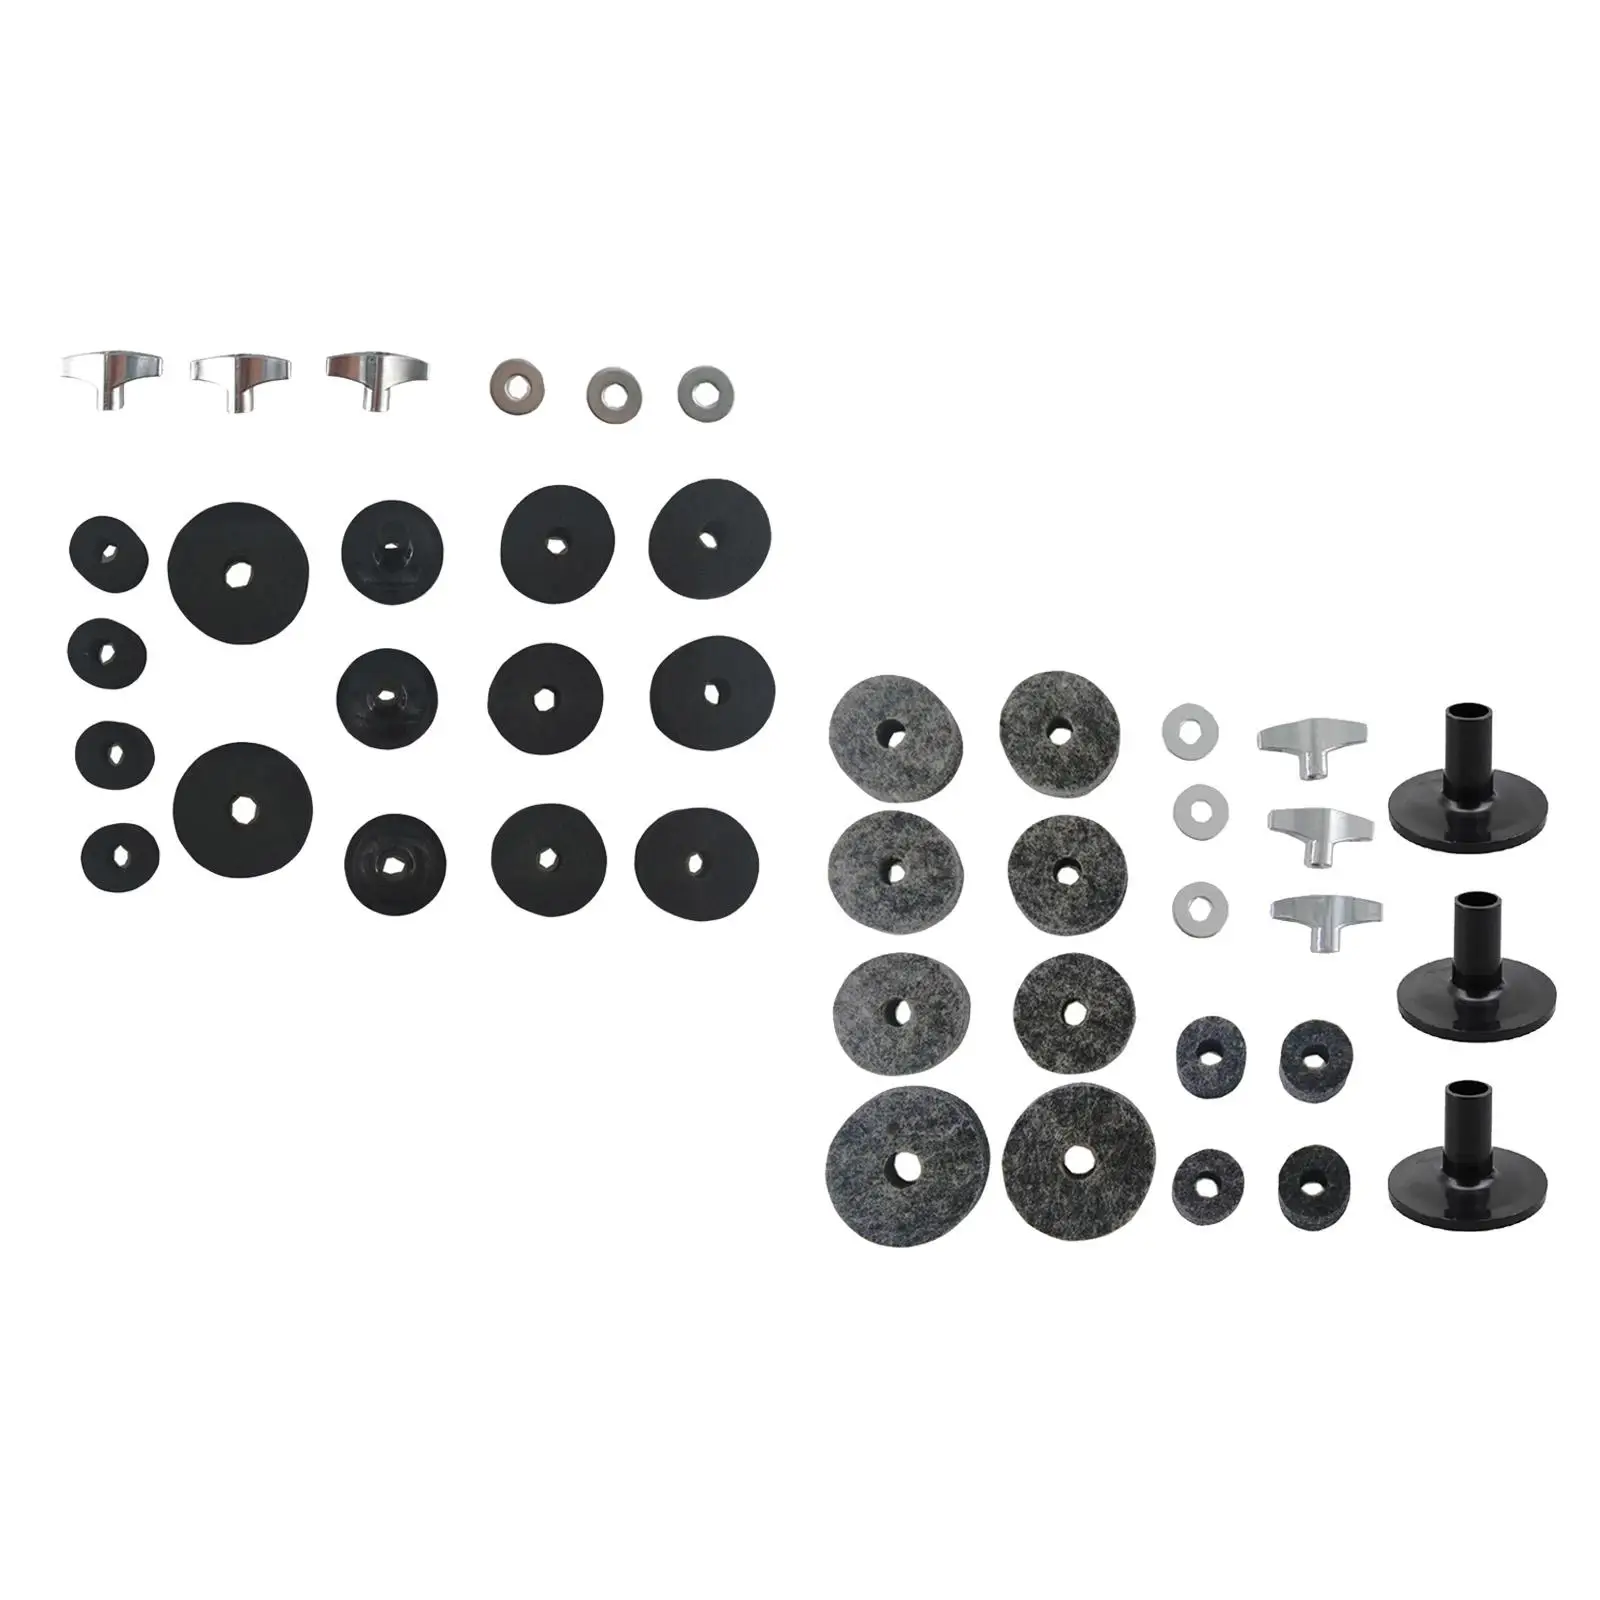 21x Replacement Cymbal Felt Washer Cymbal Washer Replacement Kit Cymbal Replacement Wing Nuts Attachment Drum Sets Replacement